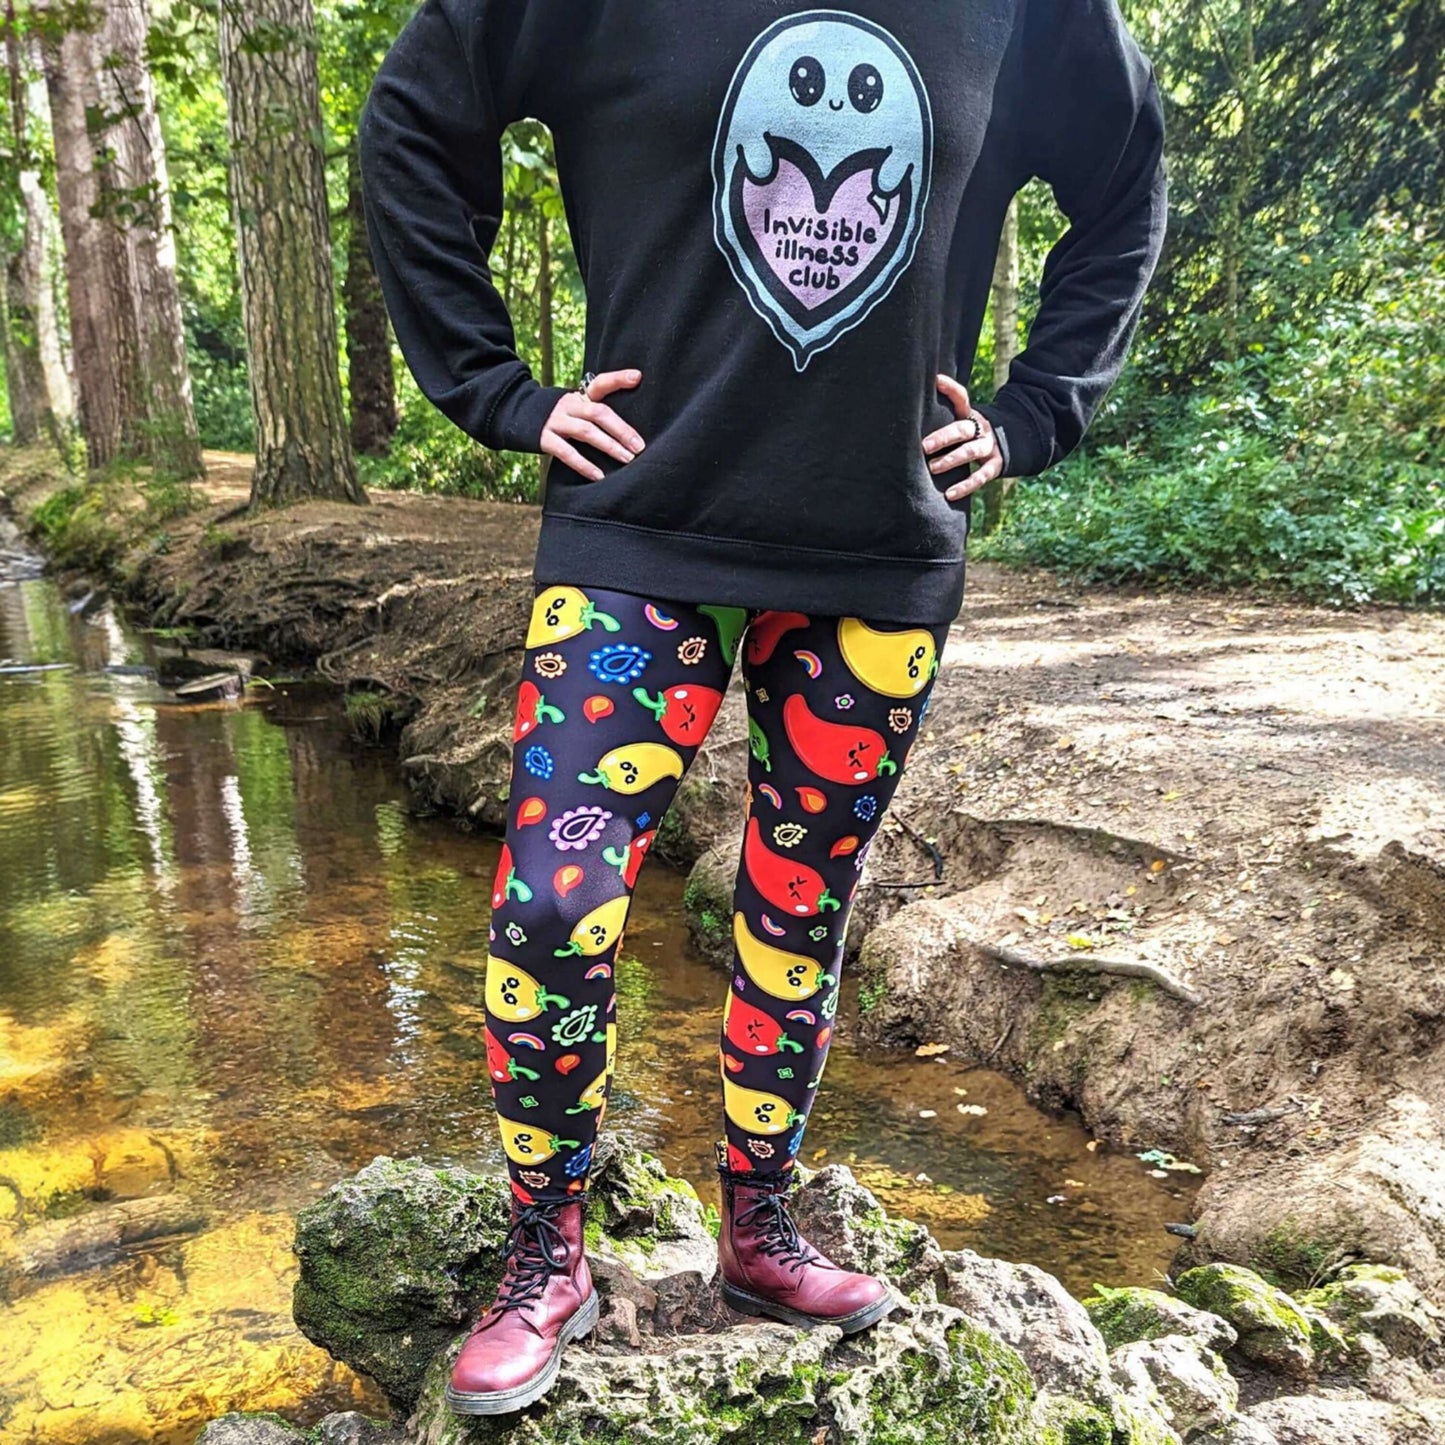 A person standing on a rock wearing Black leggings with red, green, orange and yellow chilli peppers with cute faces on and various cute doodles around them. The hand drawn design is raising awareness for neurodiversity.